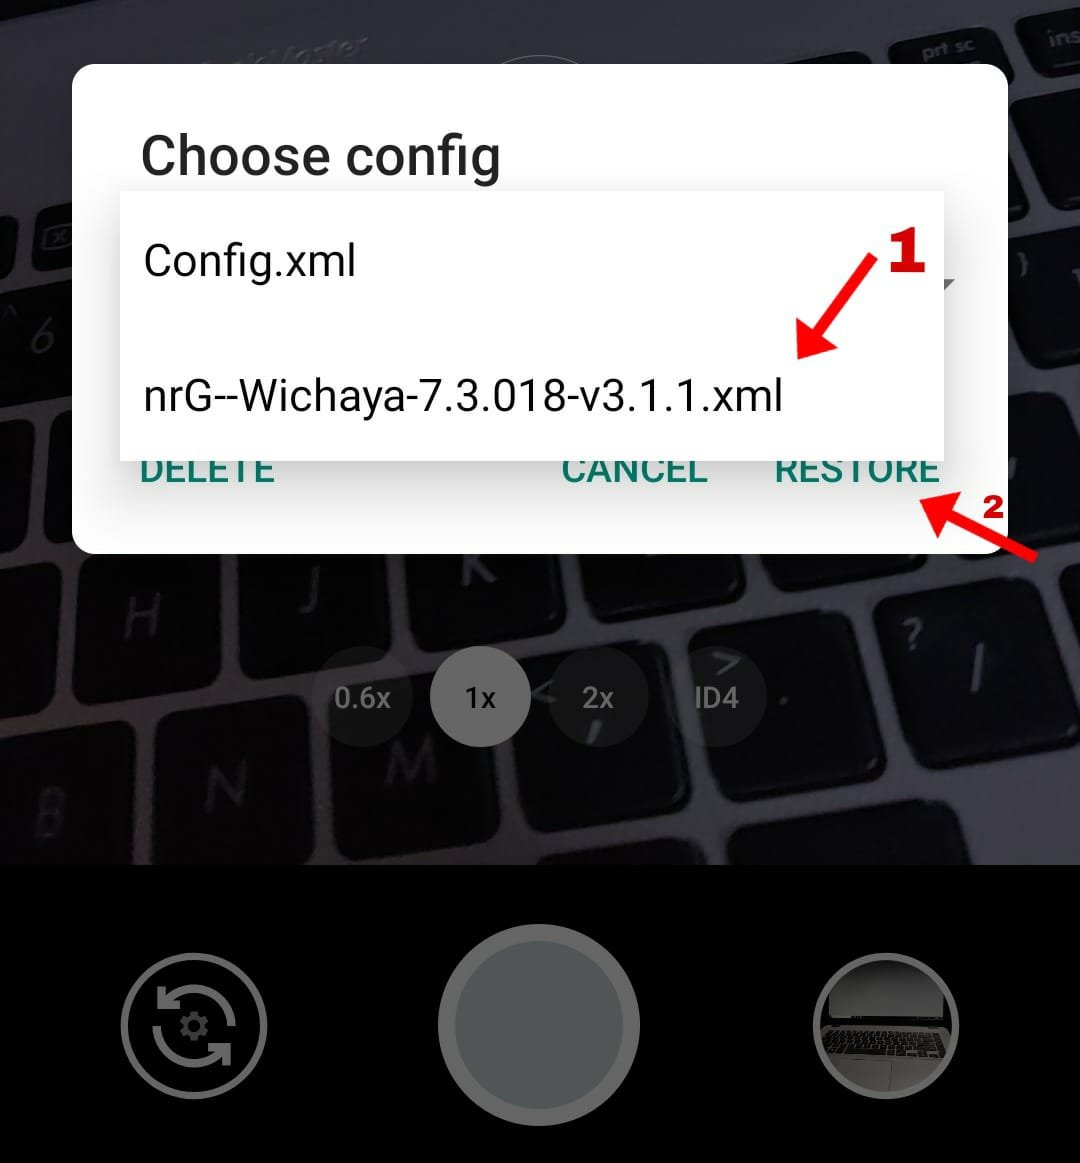 Select and click restore to apply the config file on gcam